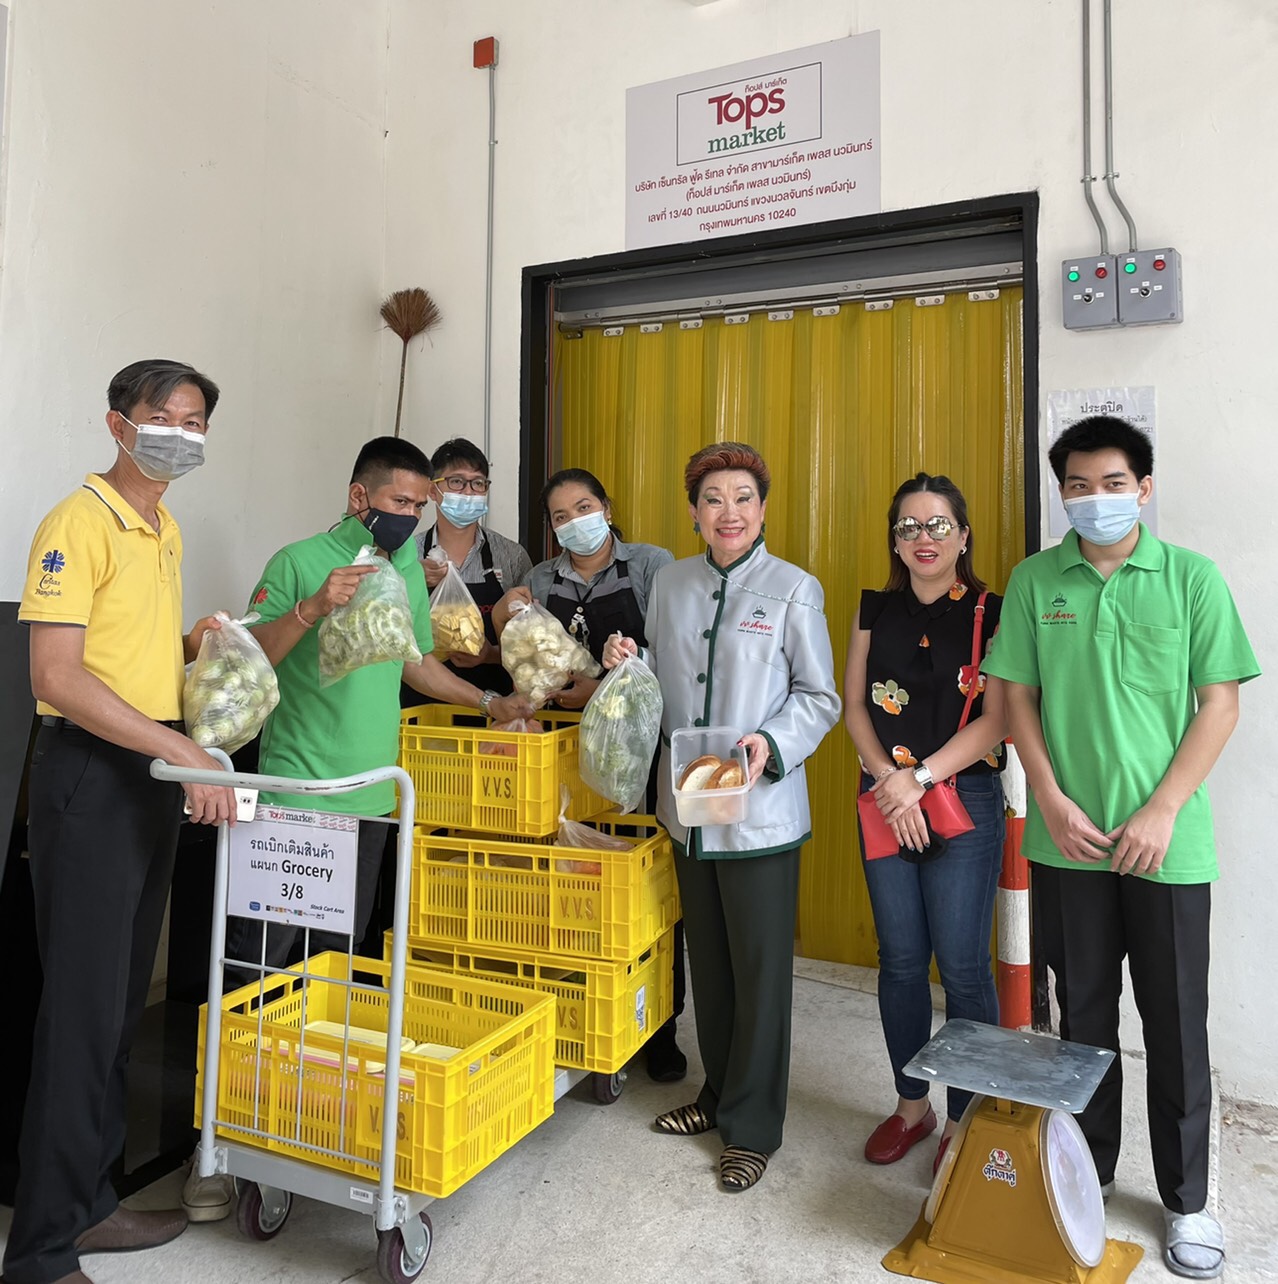 The Food for Good Deed project by Tops market aims to help those underprivileged in Rangsit area by donating surplus food